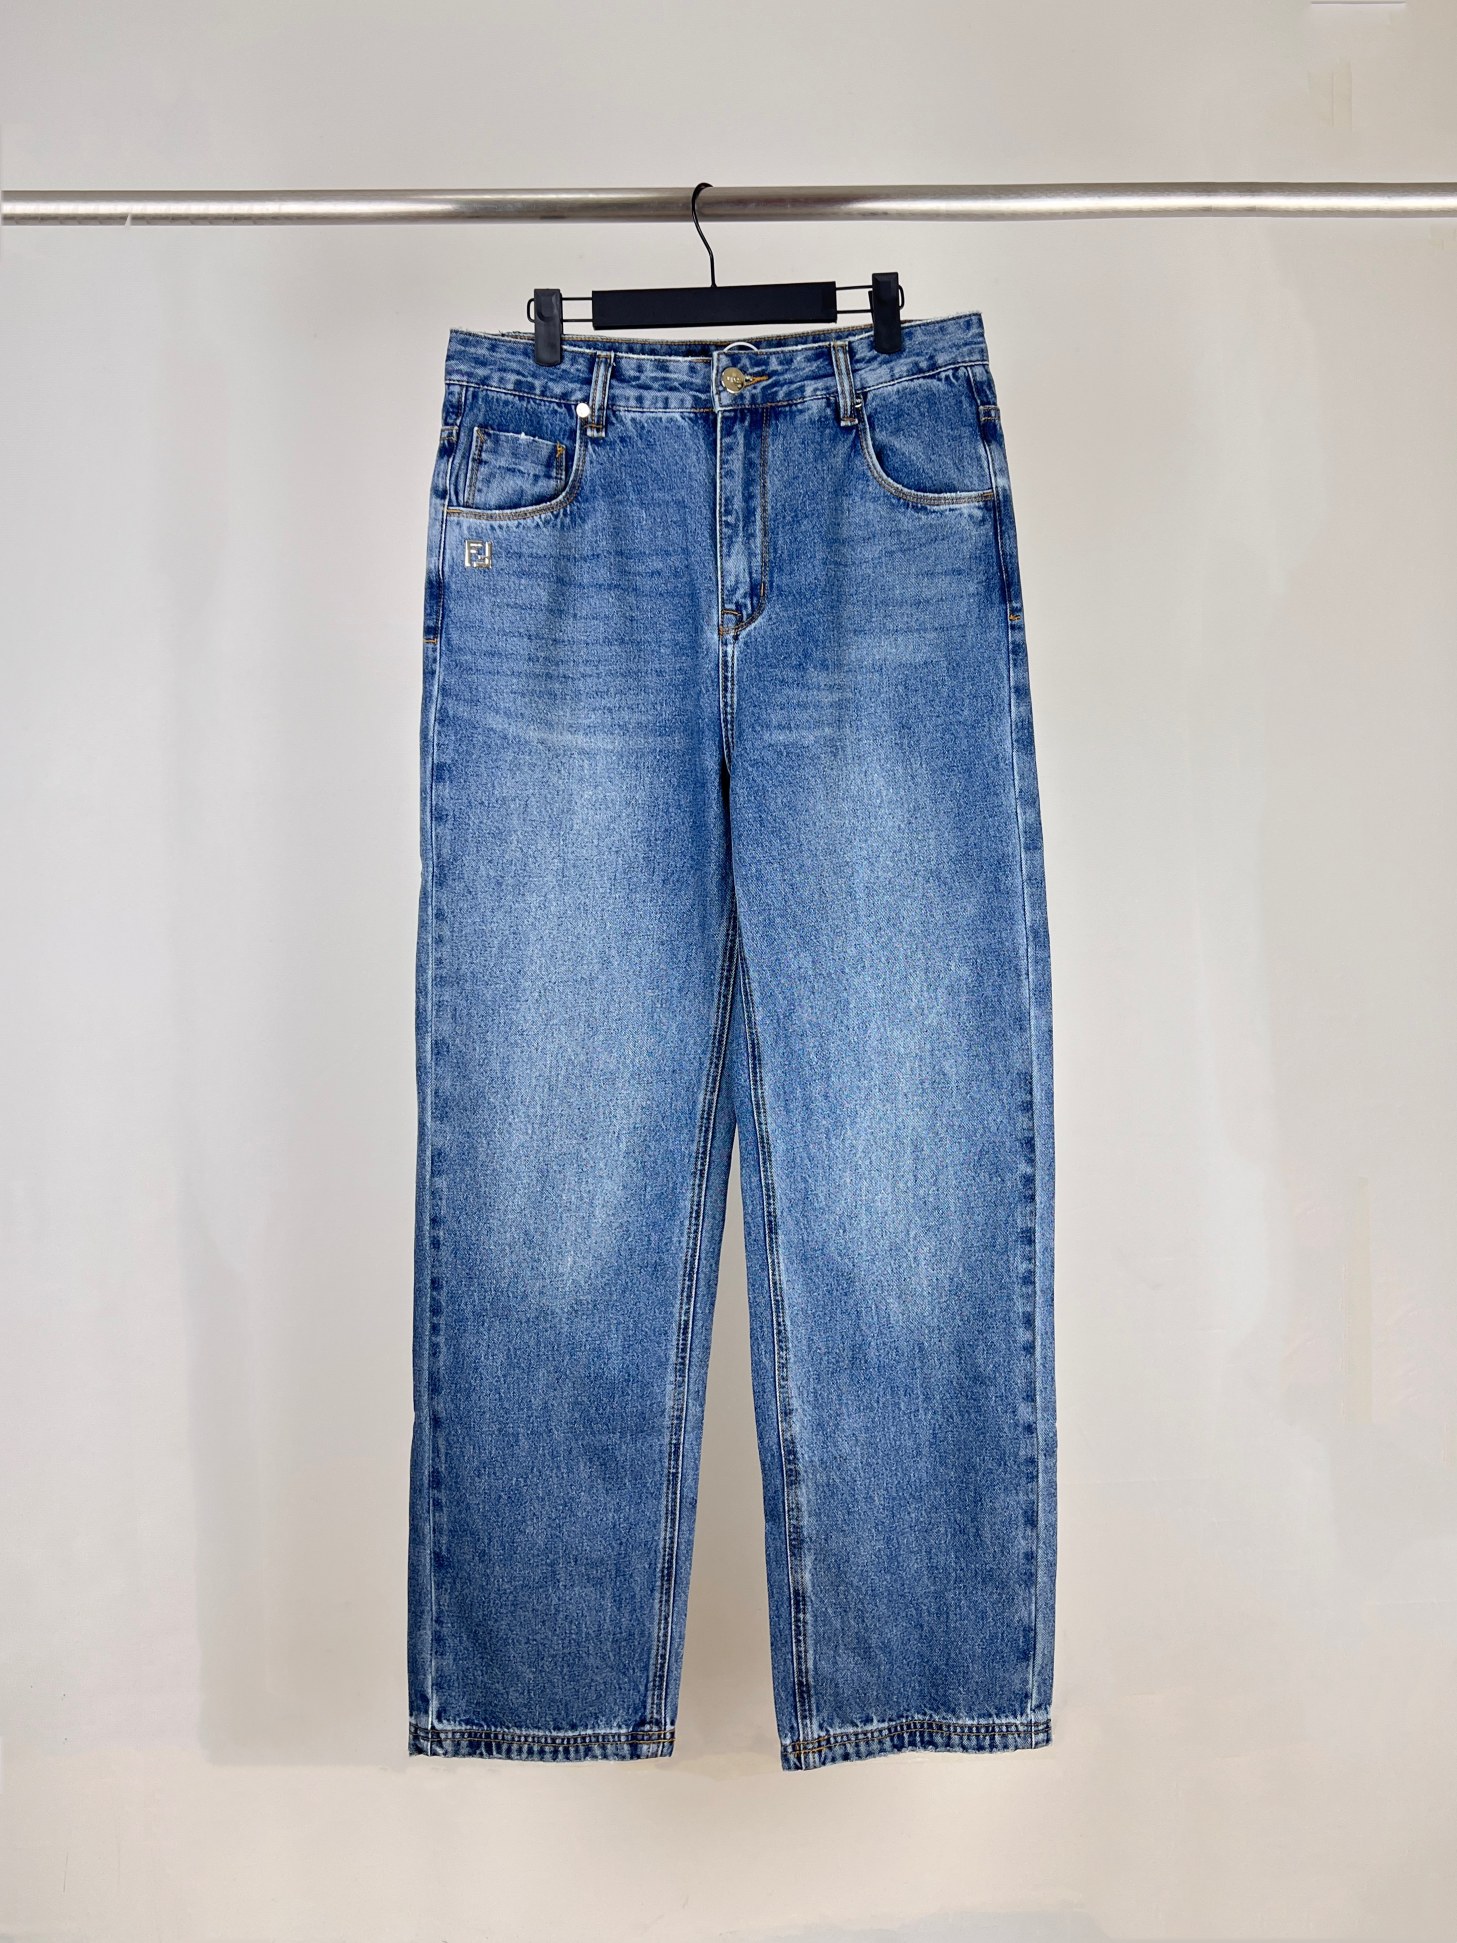 Fendi Clothing Jeans Pants & Trousers Buy Top High quality Replica